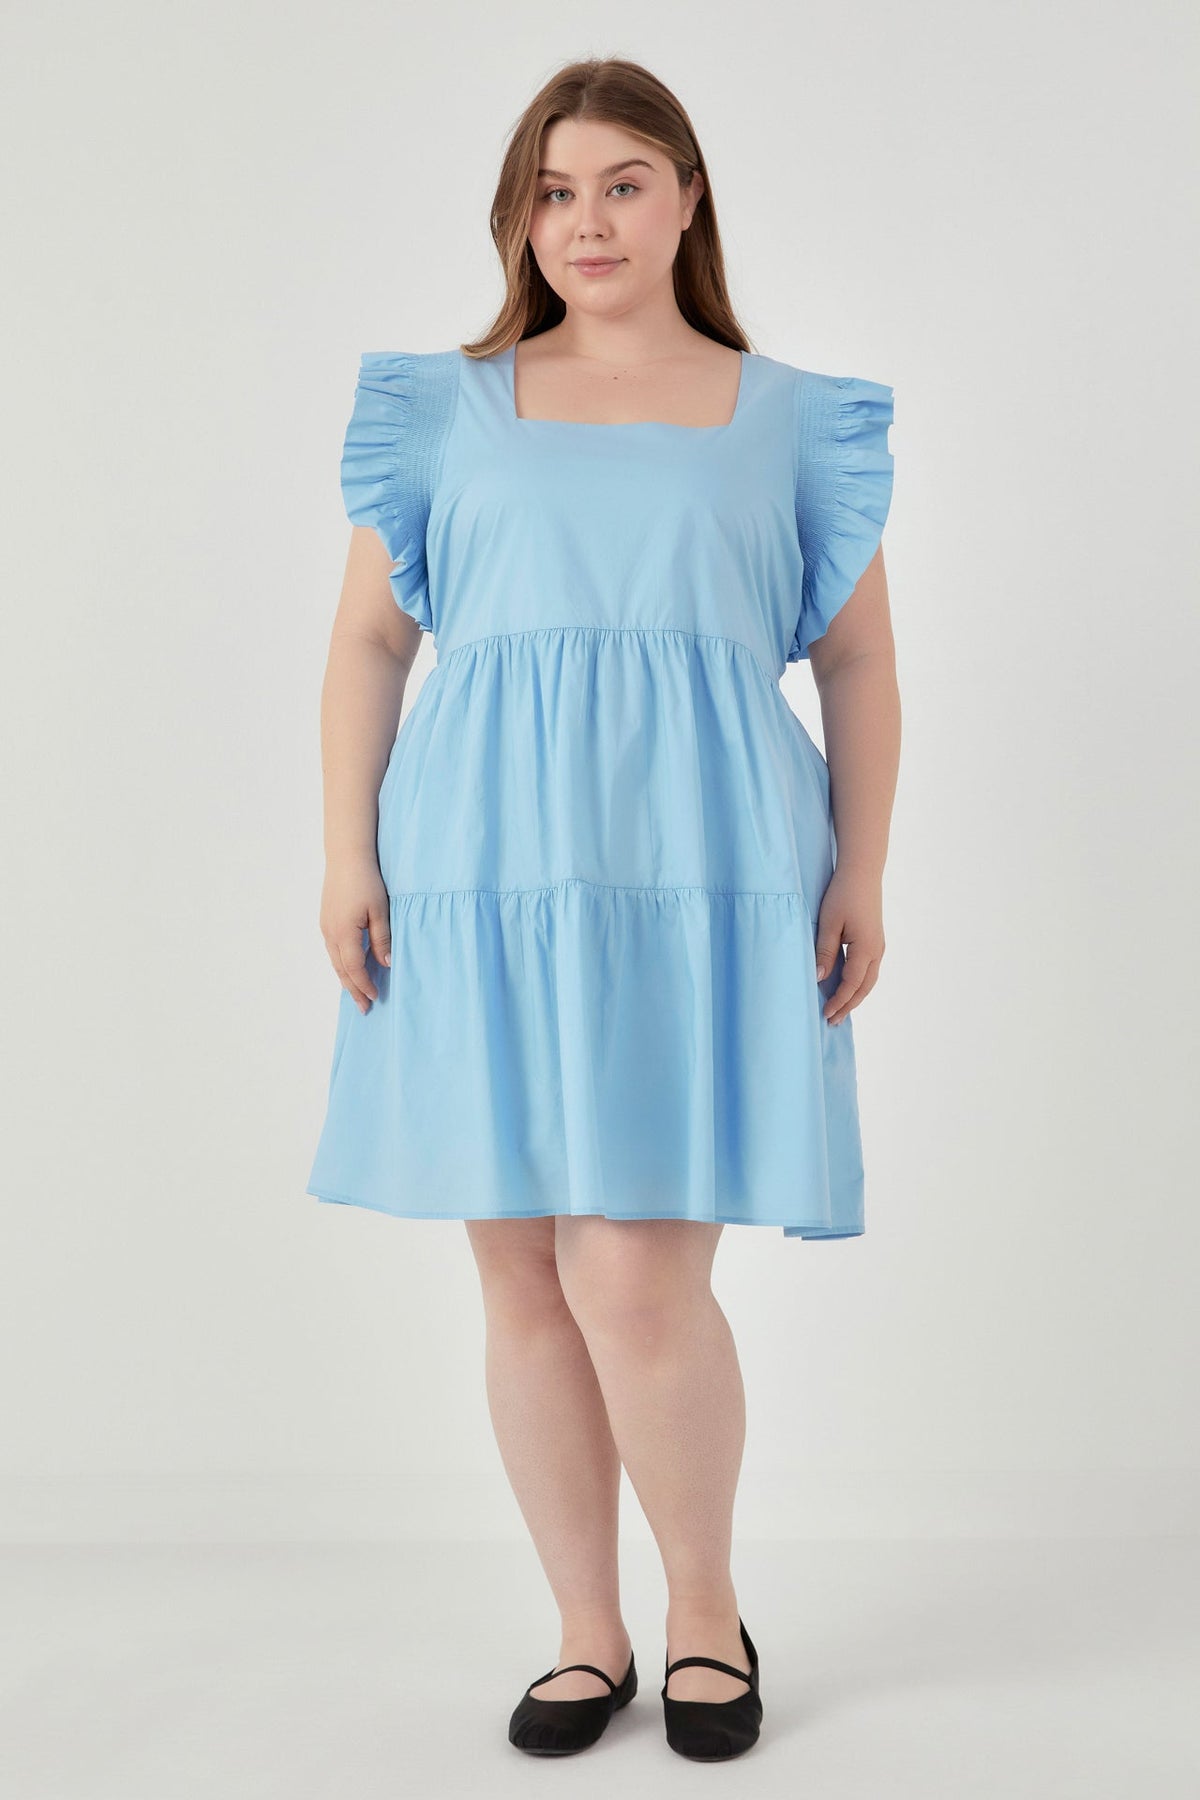 ENGLISH FACTORY - Ruffled Dreess with Smocking Detail - DRESSES available at Objectrare